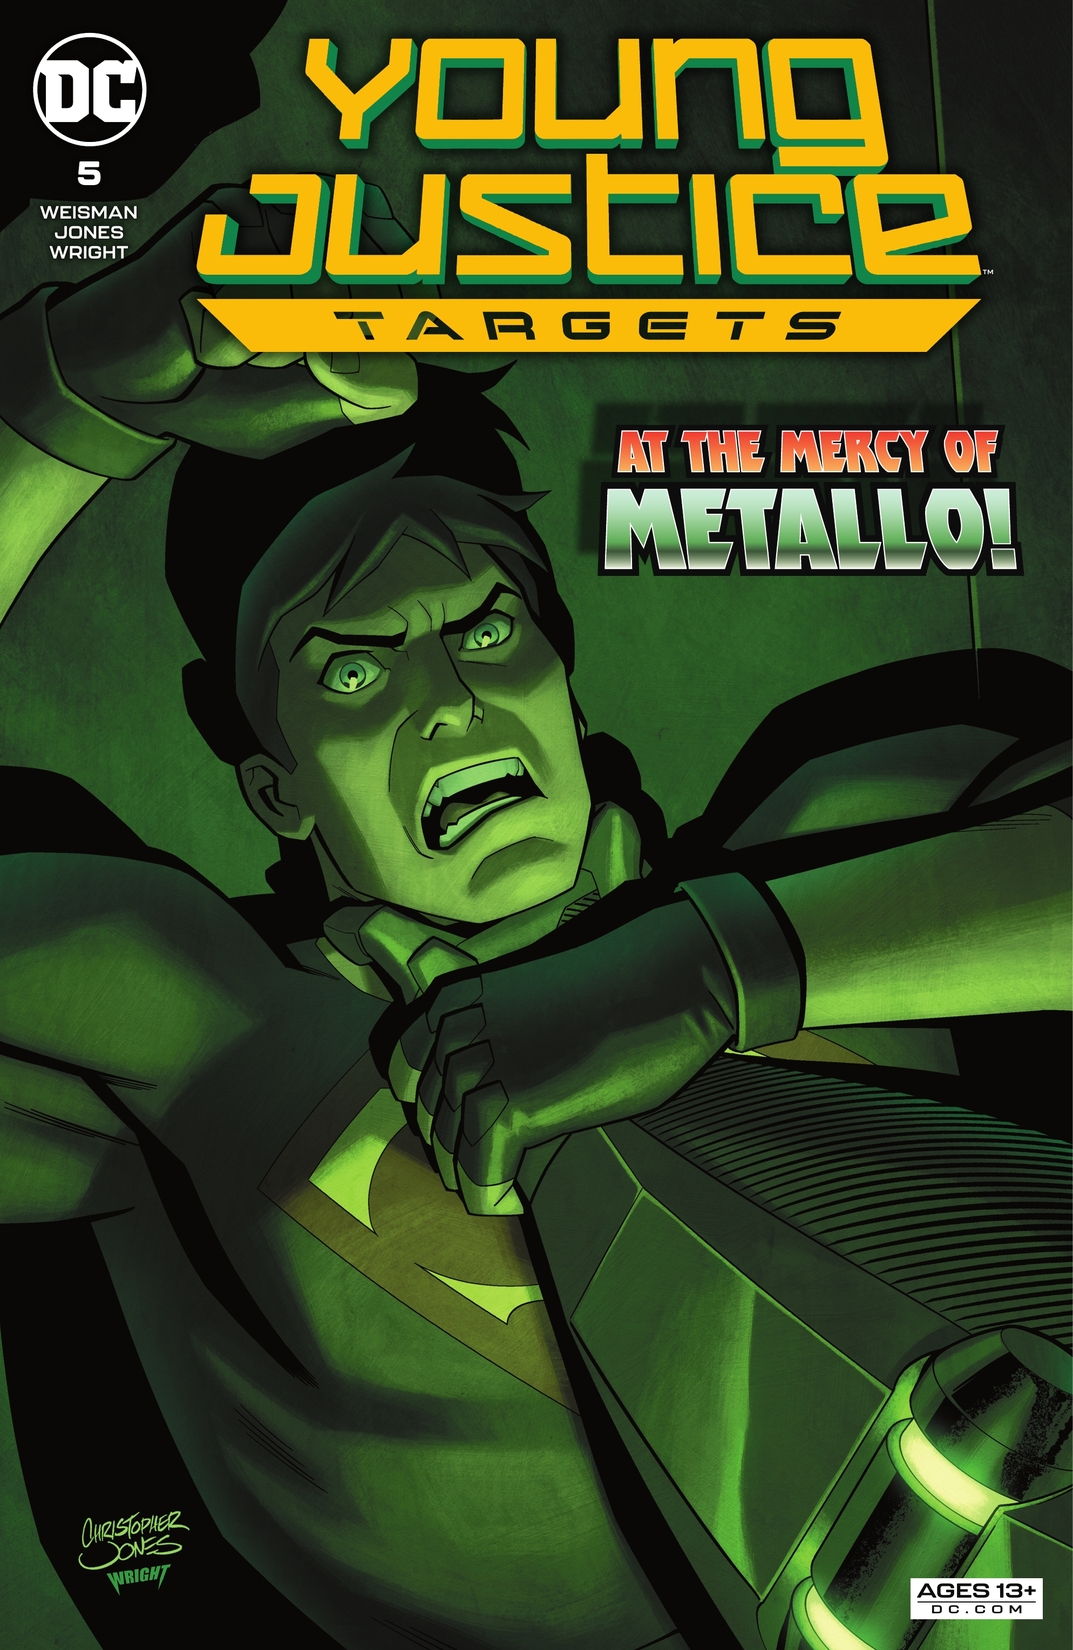 Young Justice: Targets Director's Cut #5 preview images